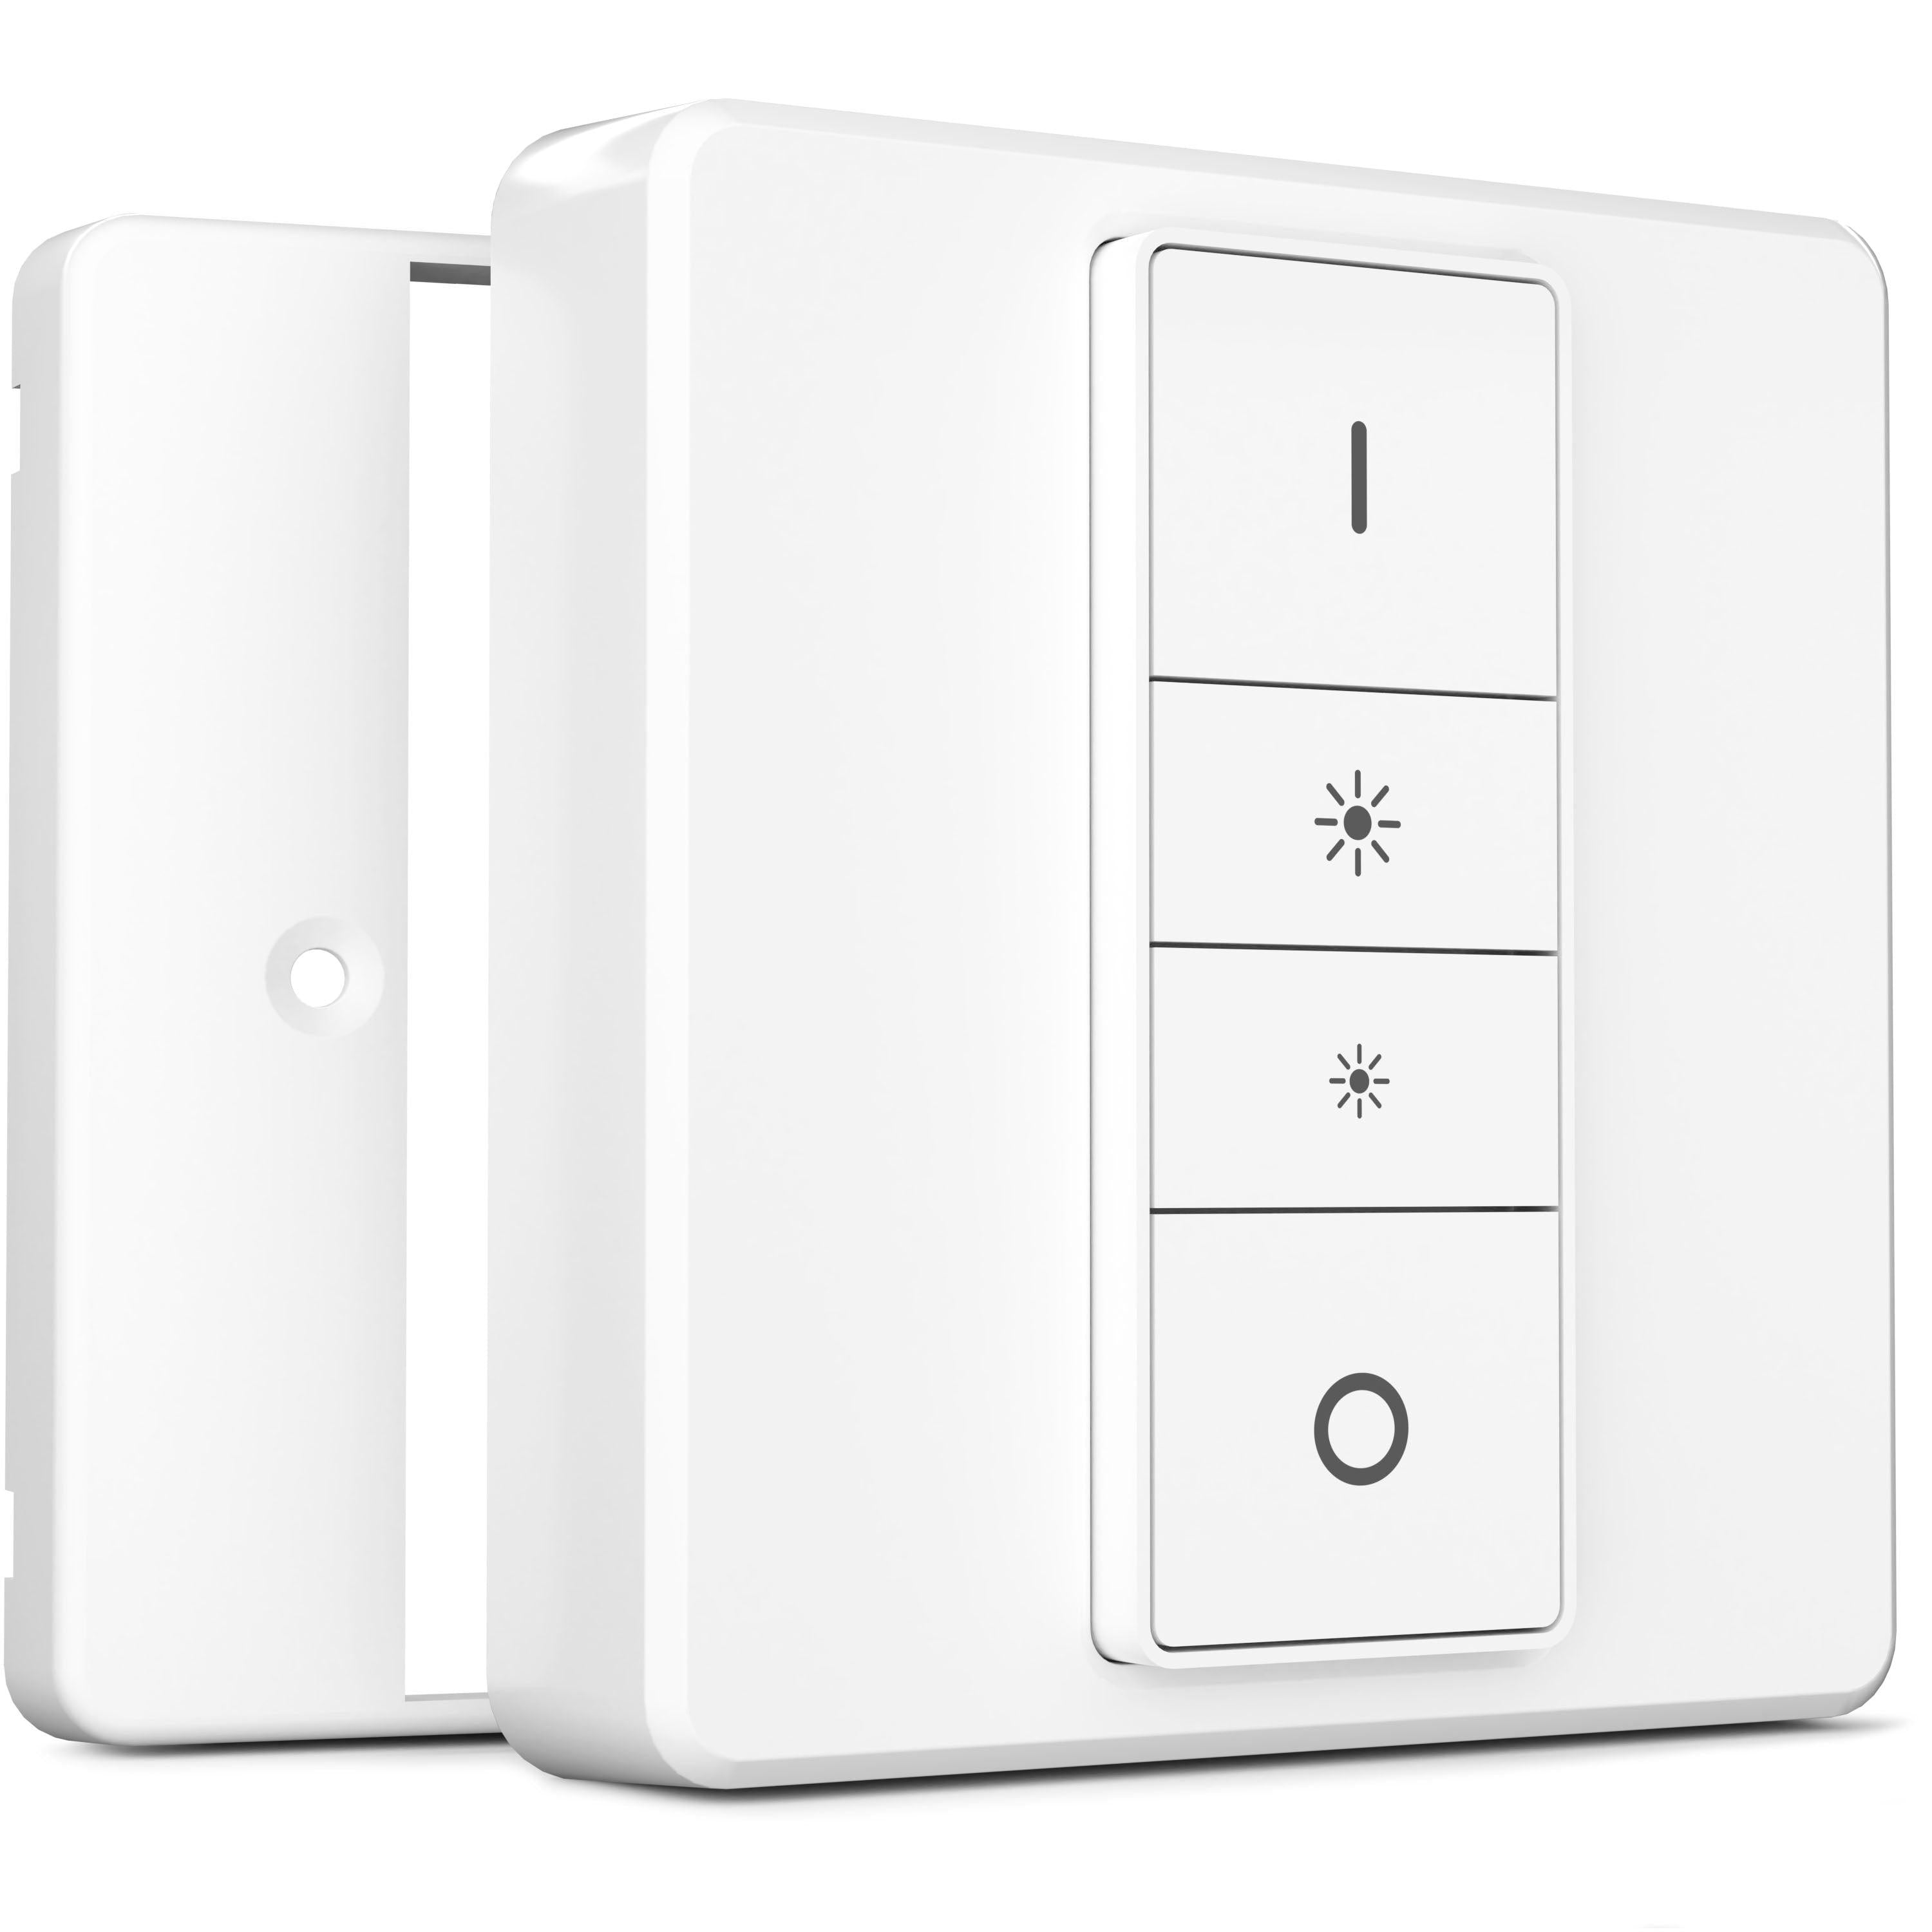 Switch for Philips Hue Dimmer V1, 1-Gang - IYOKI